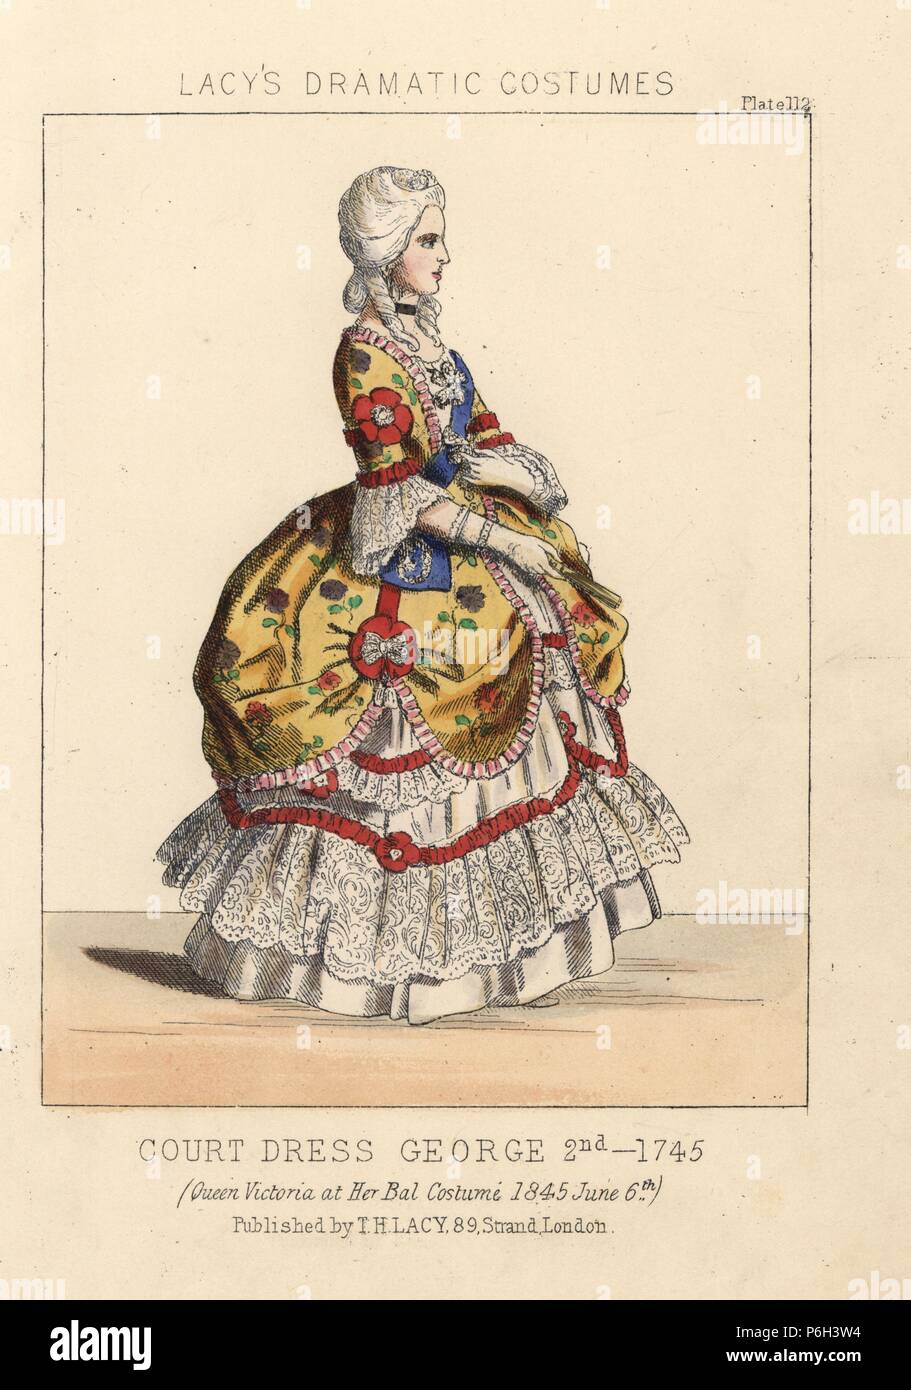 Queen Victoria in 18th century court dress at her Georgian Ball (Bal Costume), June 6th 1845. Handcoloured lithograph from Thomas Hailes Lacy's 'Female Costumes Historical, National and Dramatic in 200 Plates,' London, 1865. Lacy (1809-1873) was a British actor, playwright, theatrical manager and publisher. Stock Photo